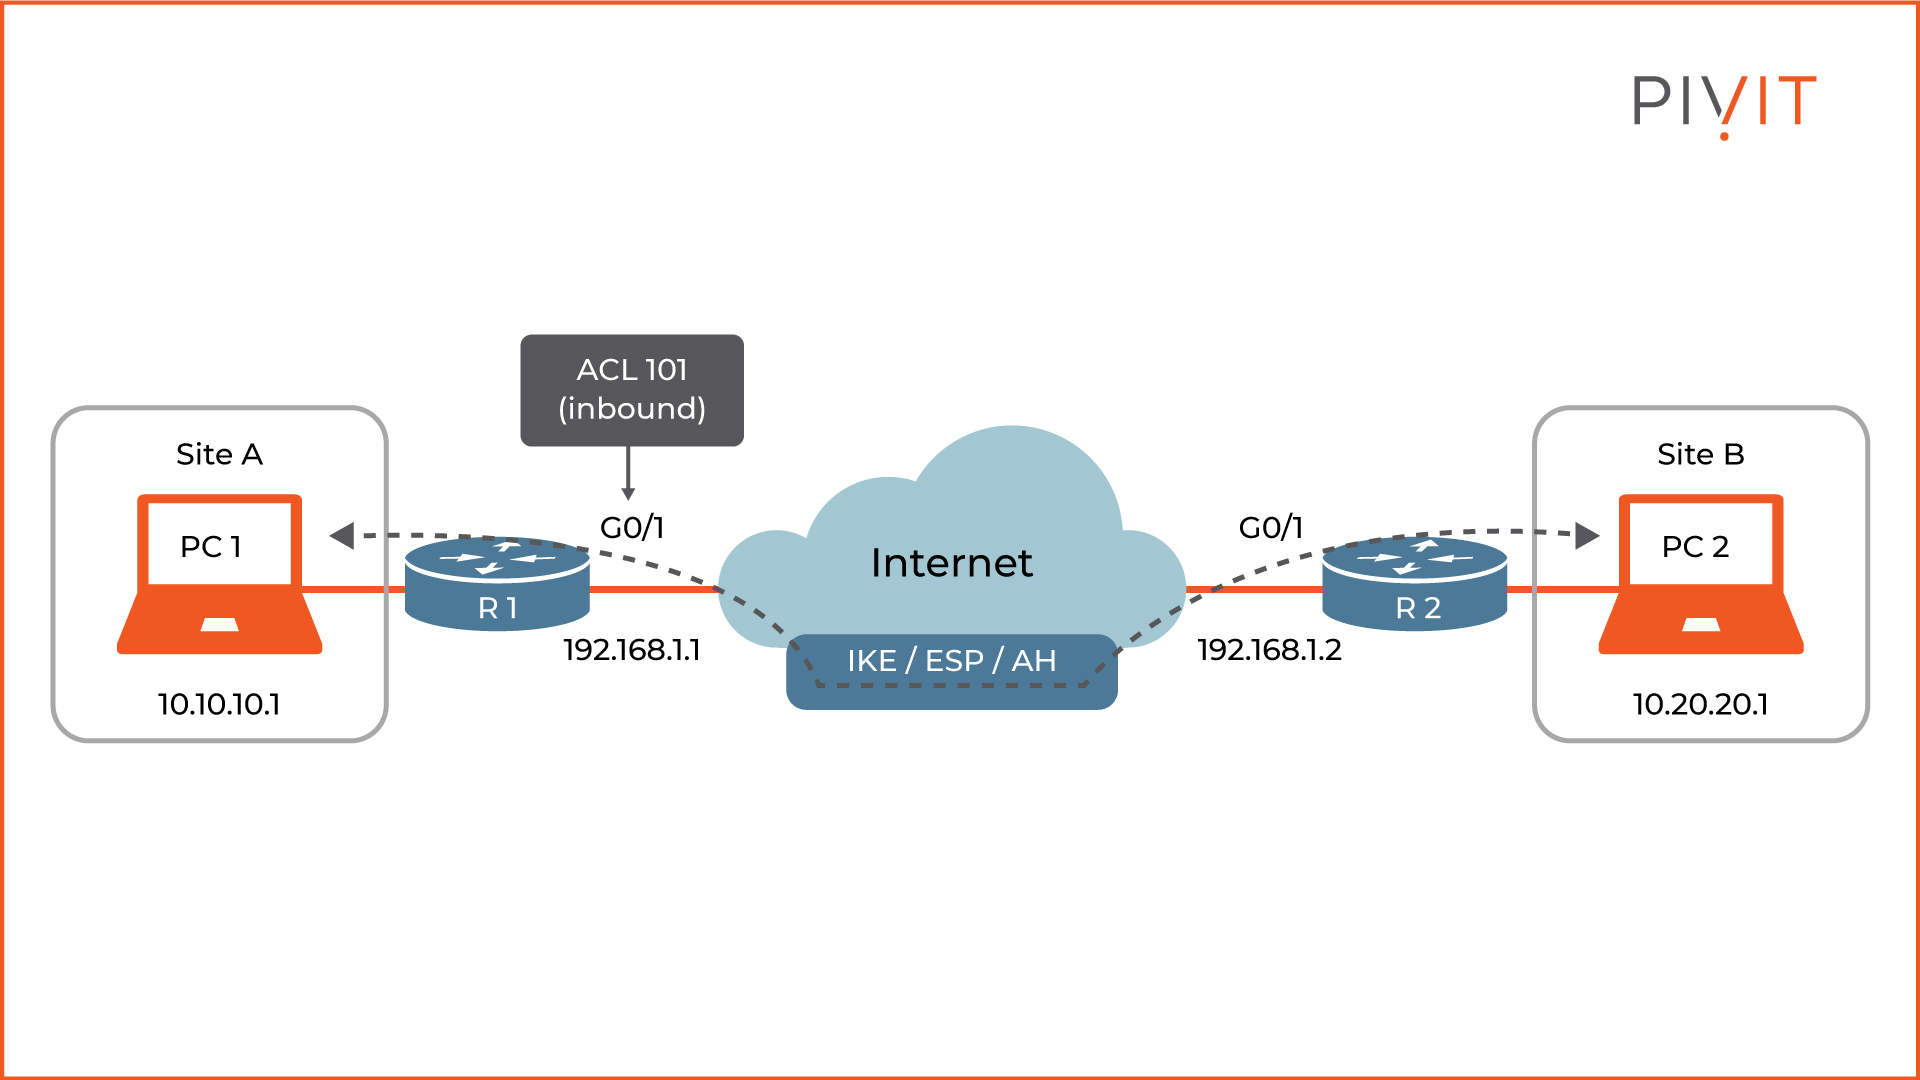 VPN protocols (IKE, ESP, AH) are allowed to flow between routers R1 and R2